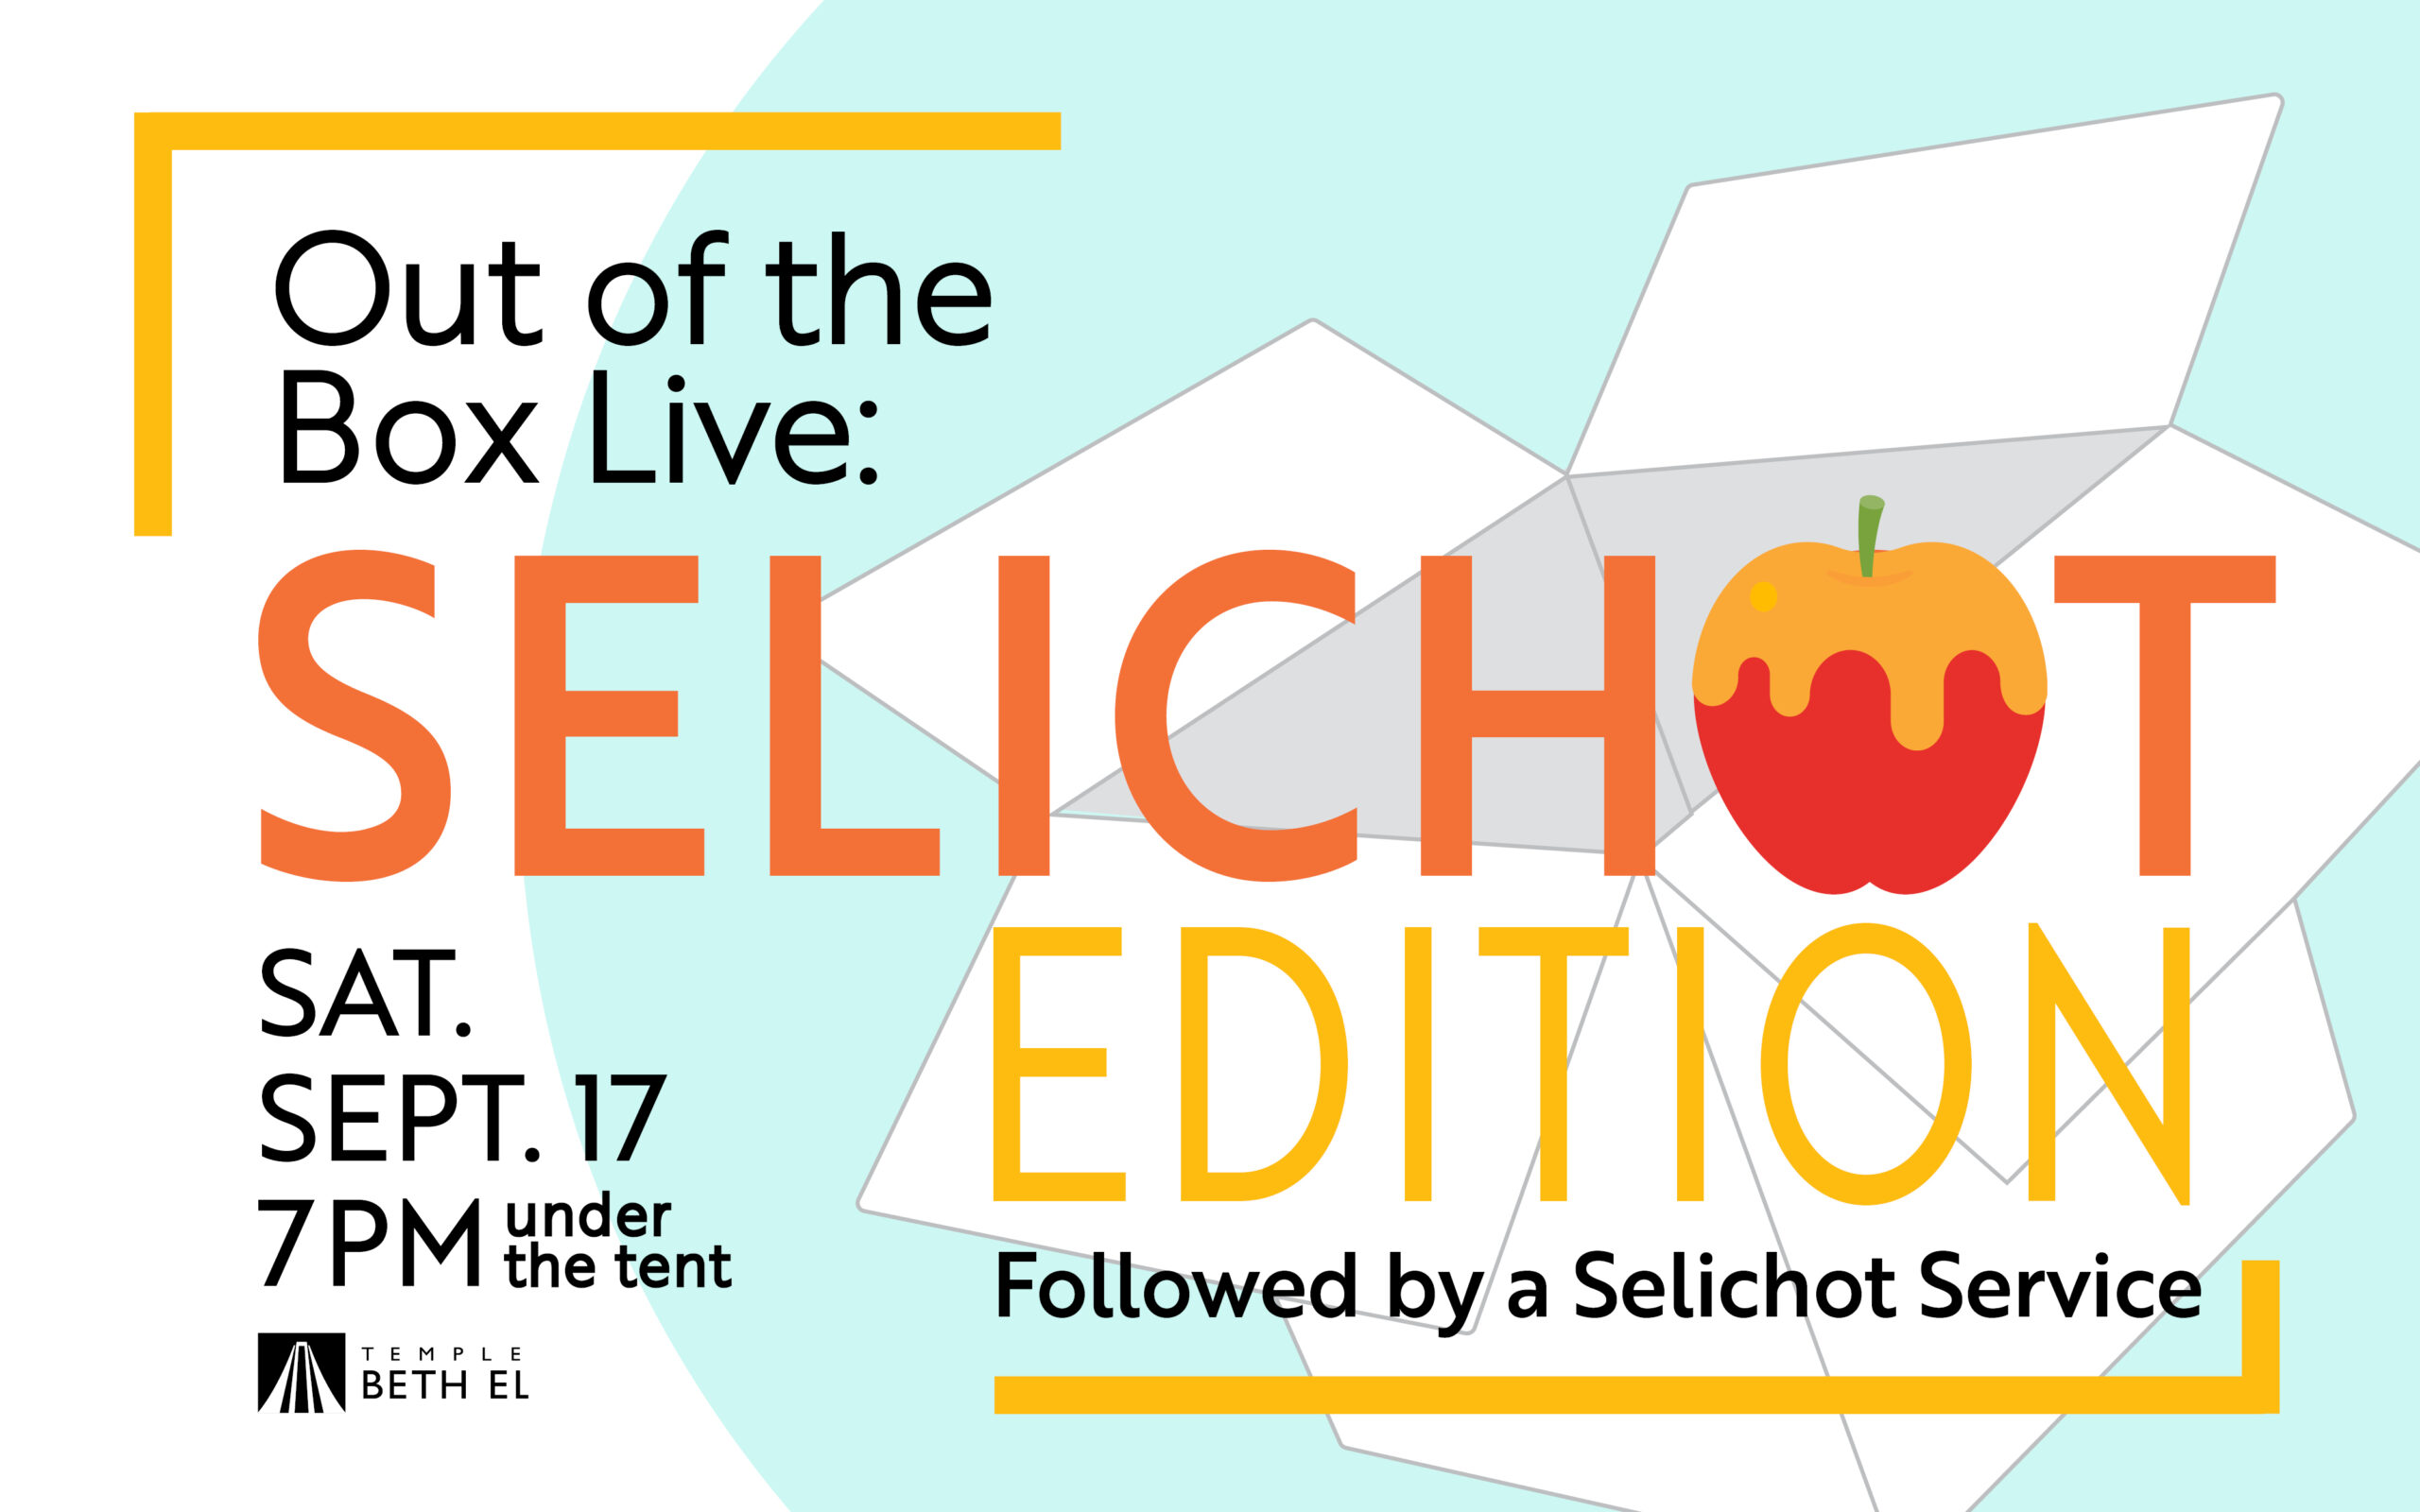 Out of the Box LIVE: Selichot Edition